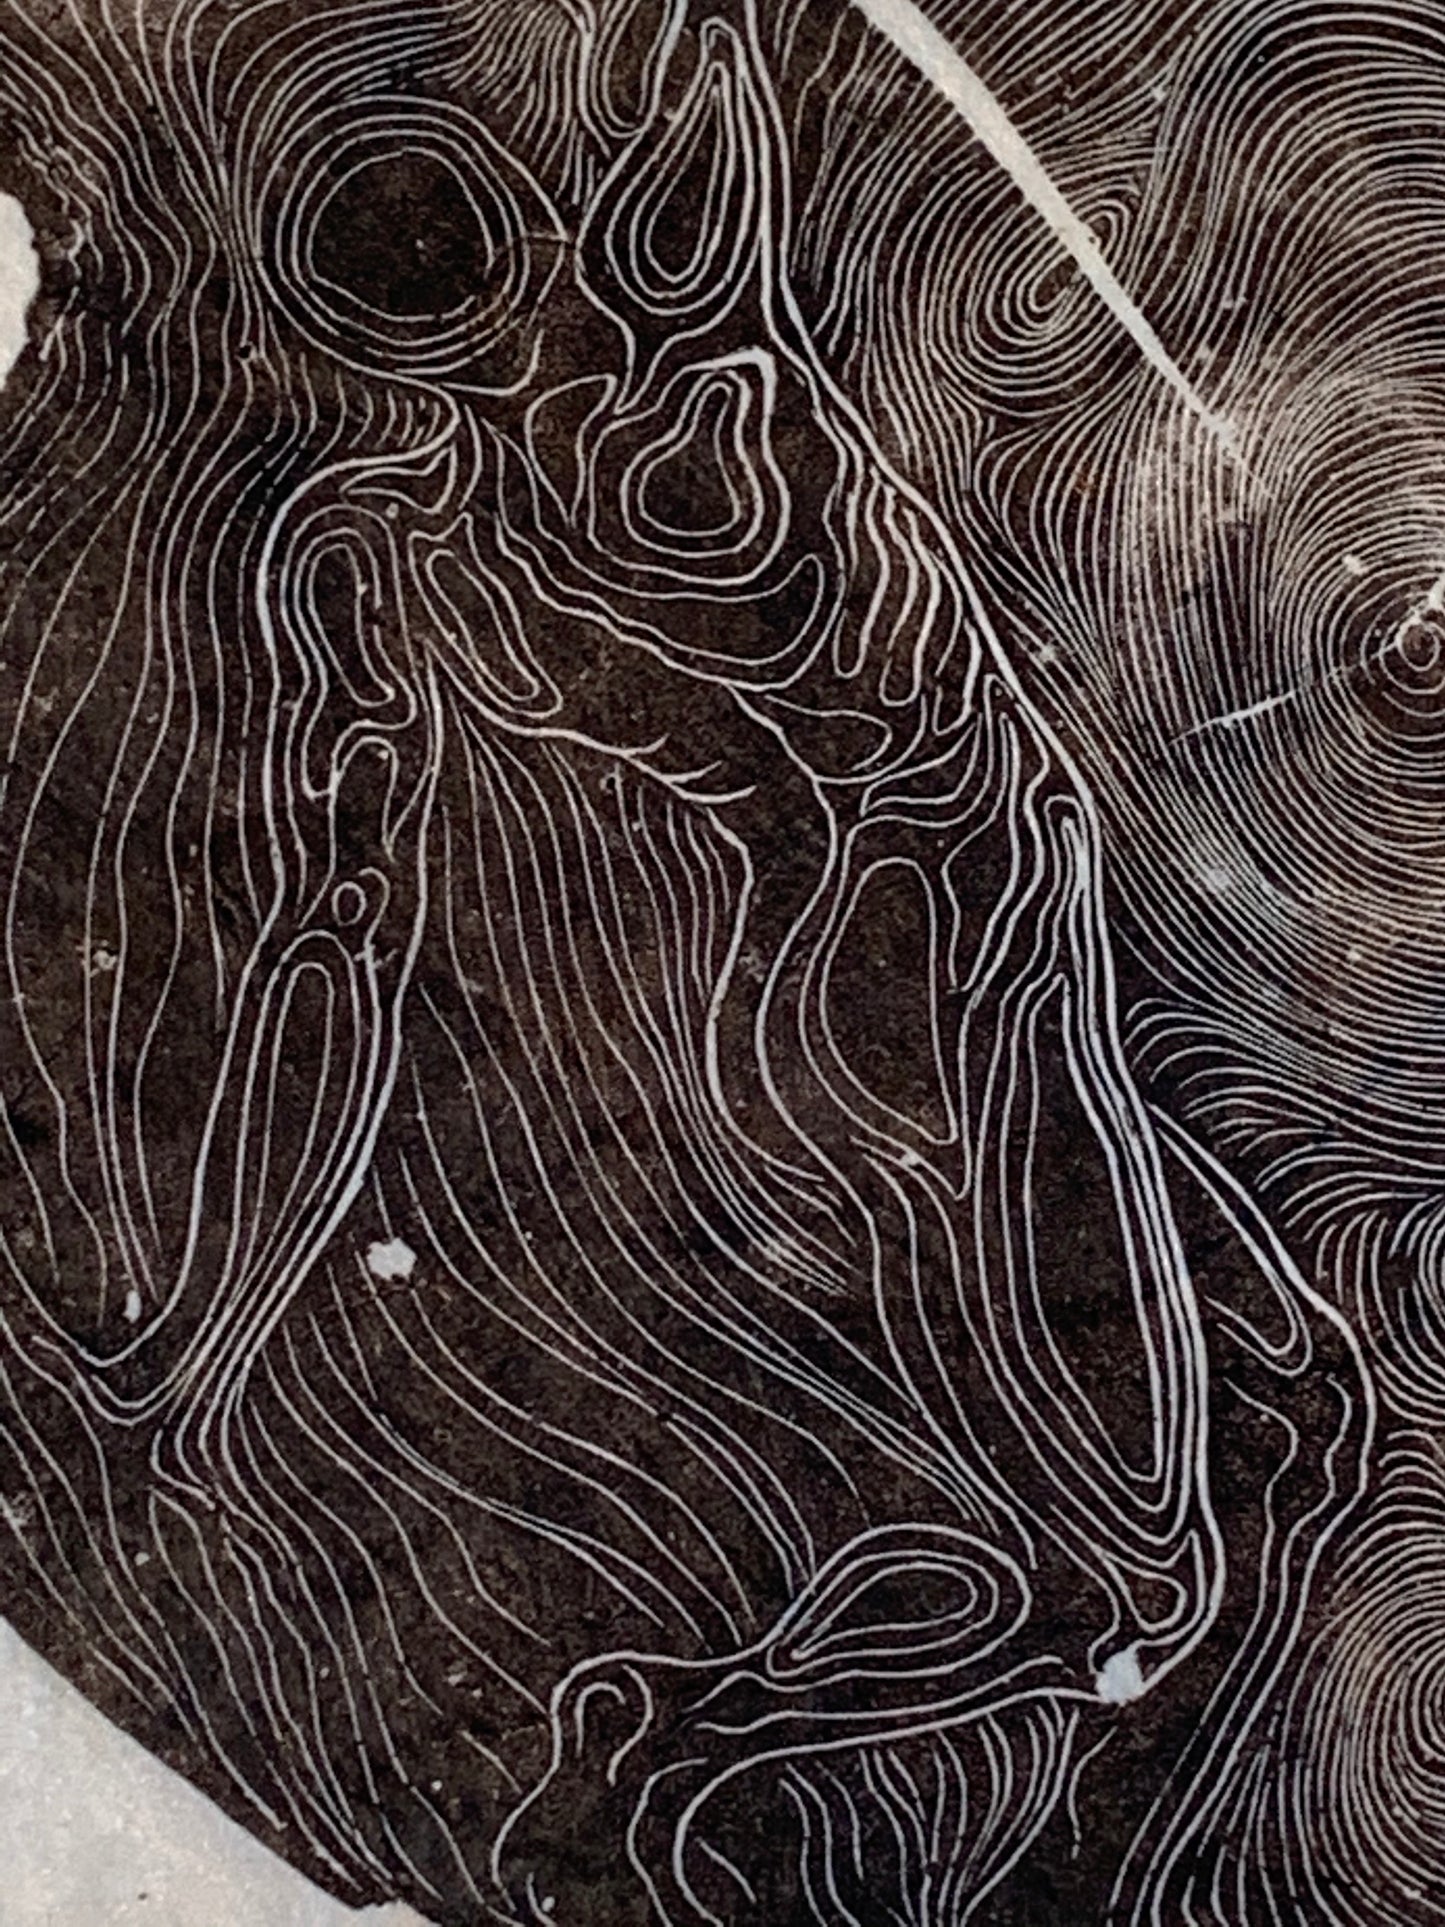 Winds Life of Tree Rings Original Wood Engraving Male in Storm Surreal